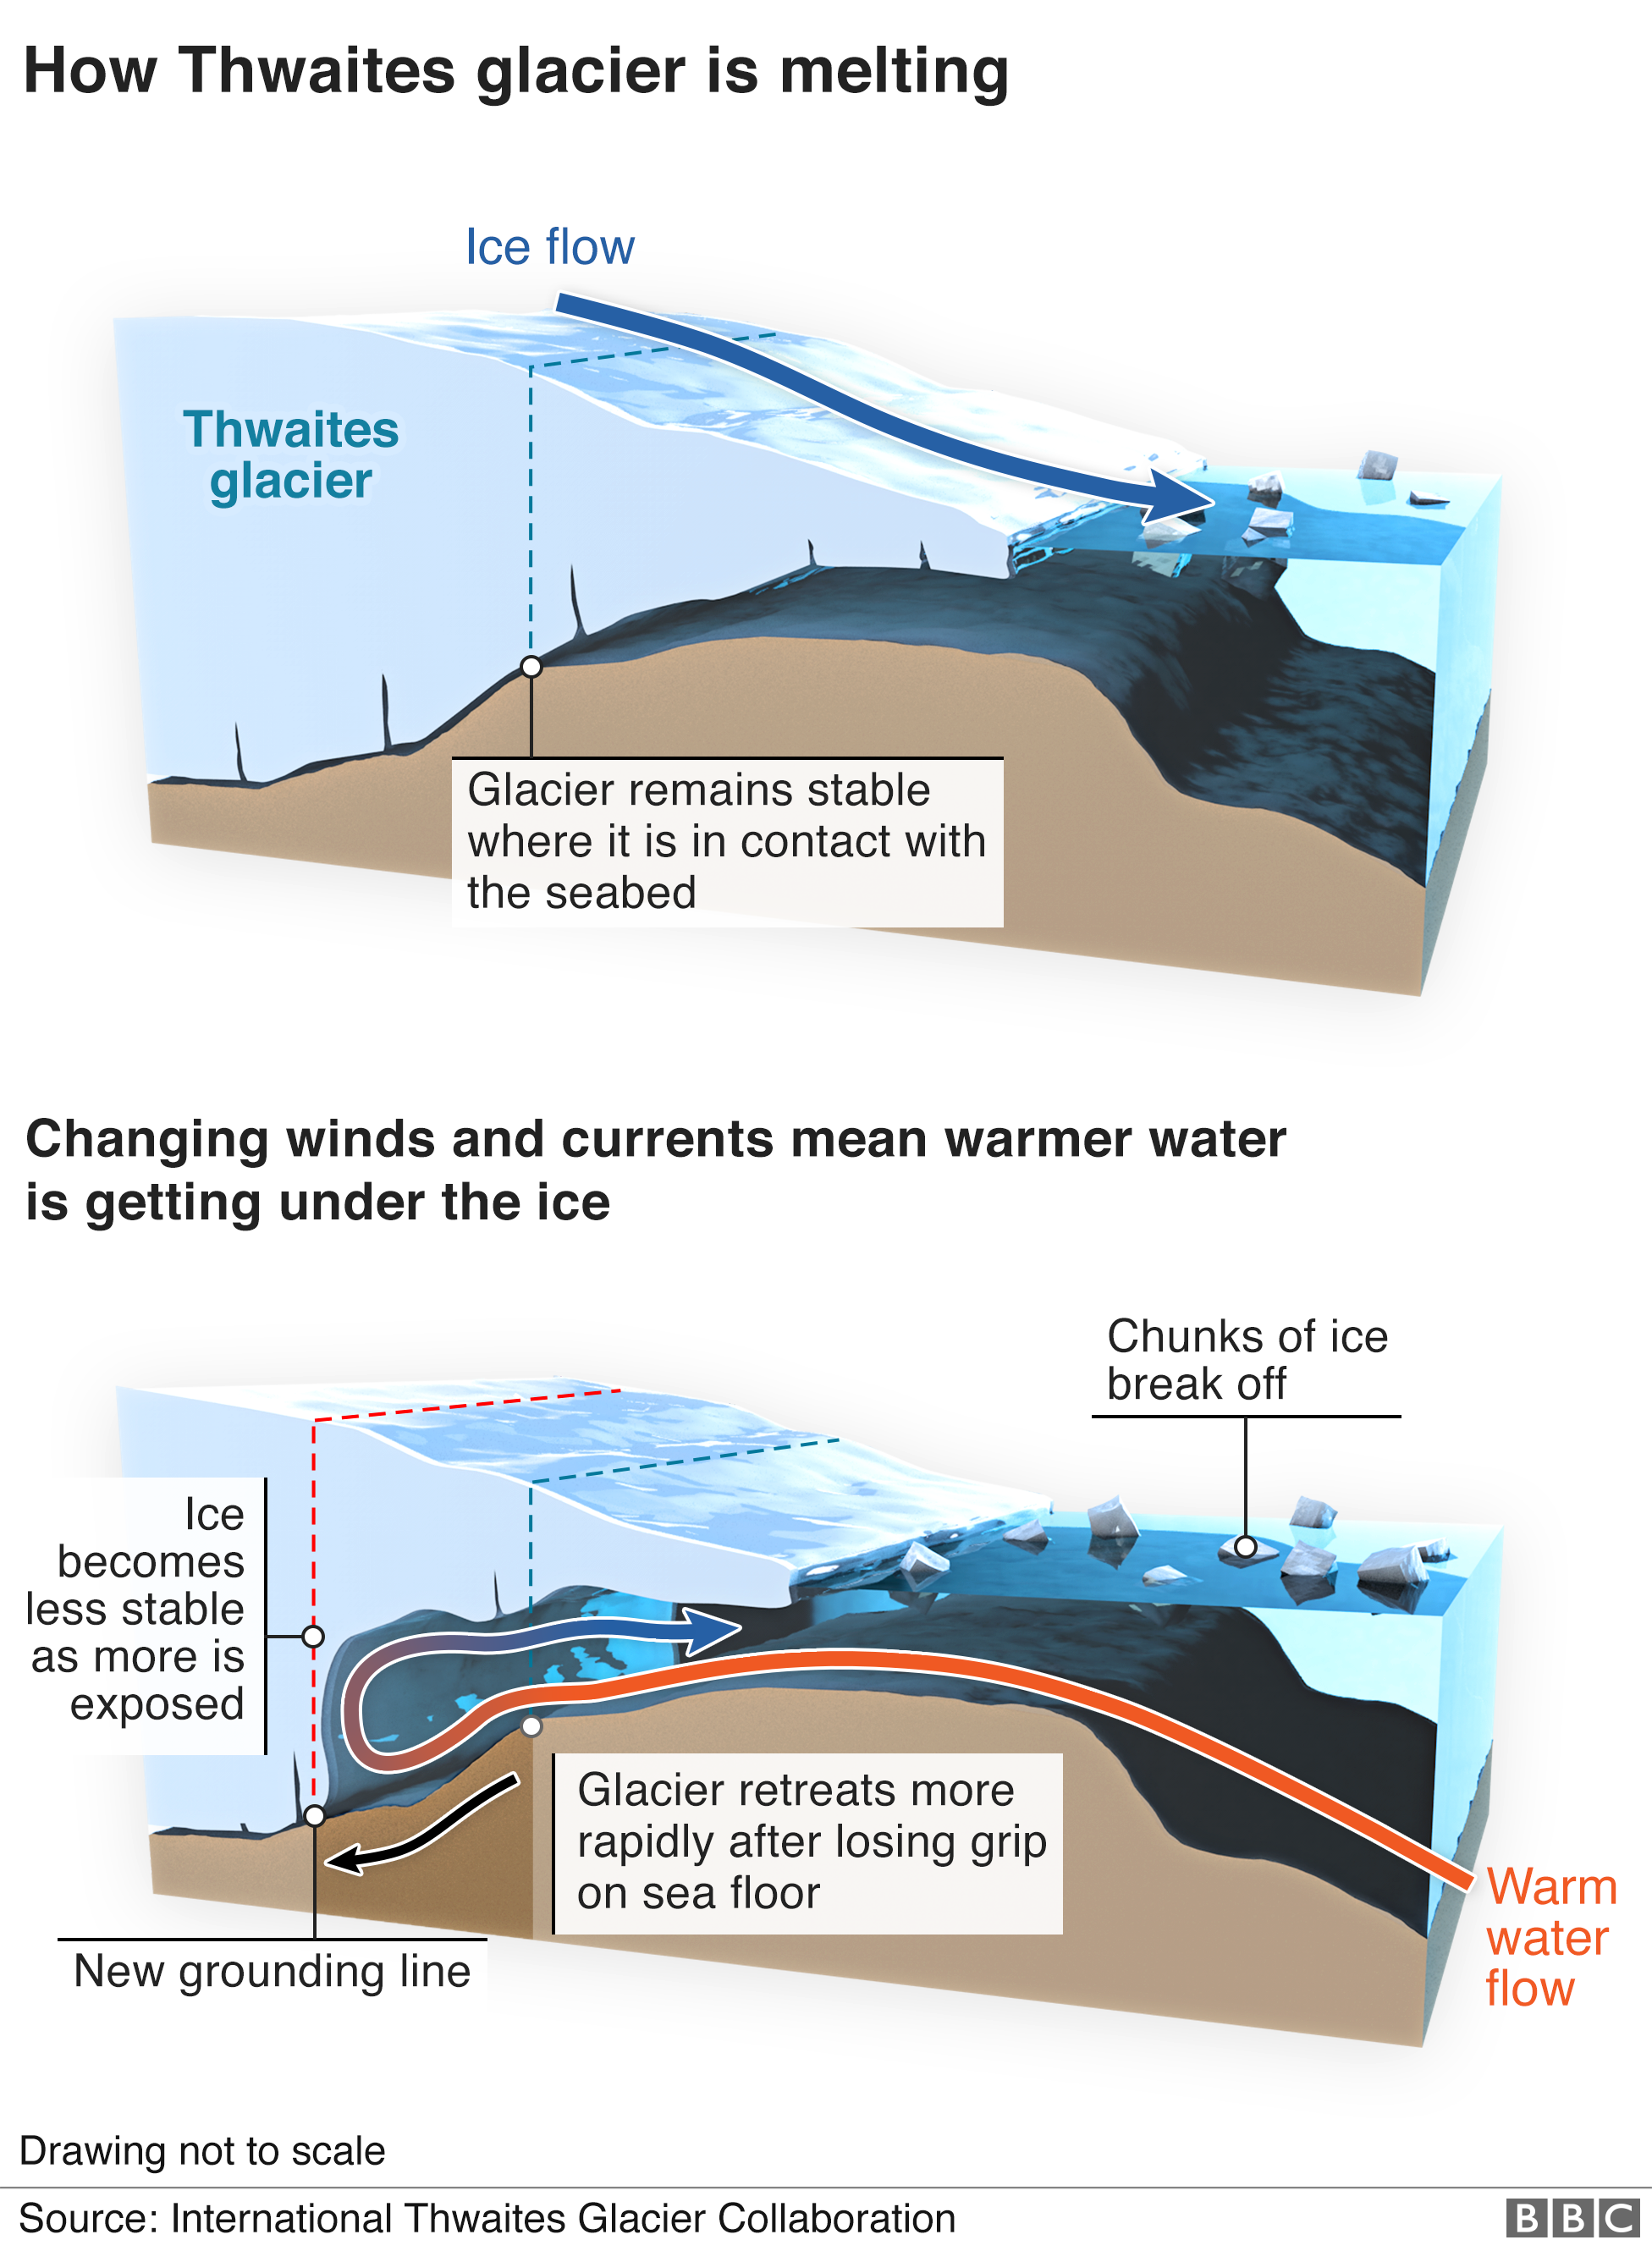 3d infographic explaining how warmer water is getting under the ice and speeding up the melting process